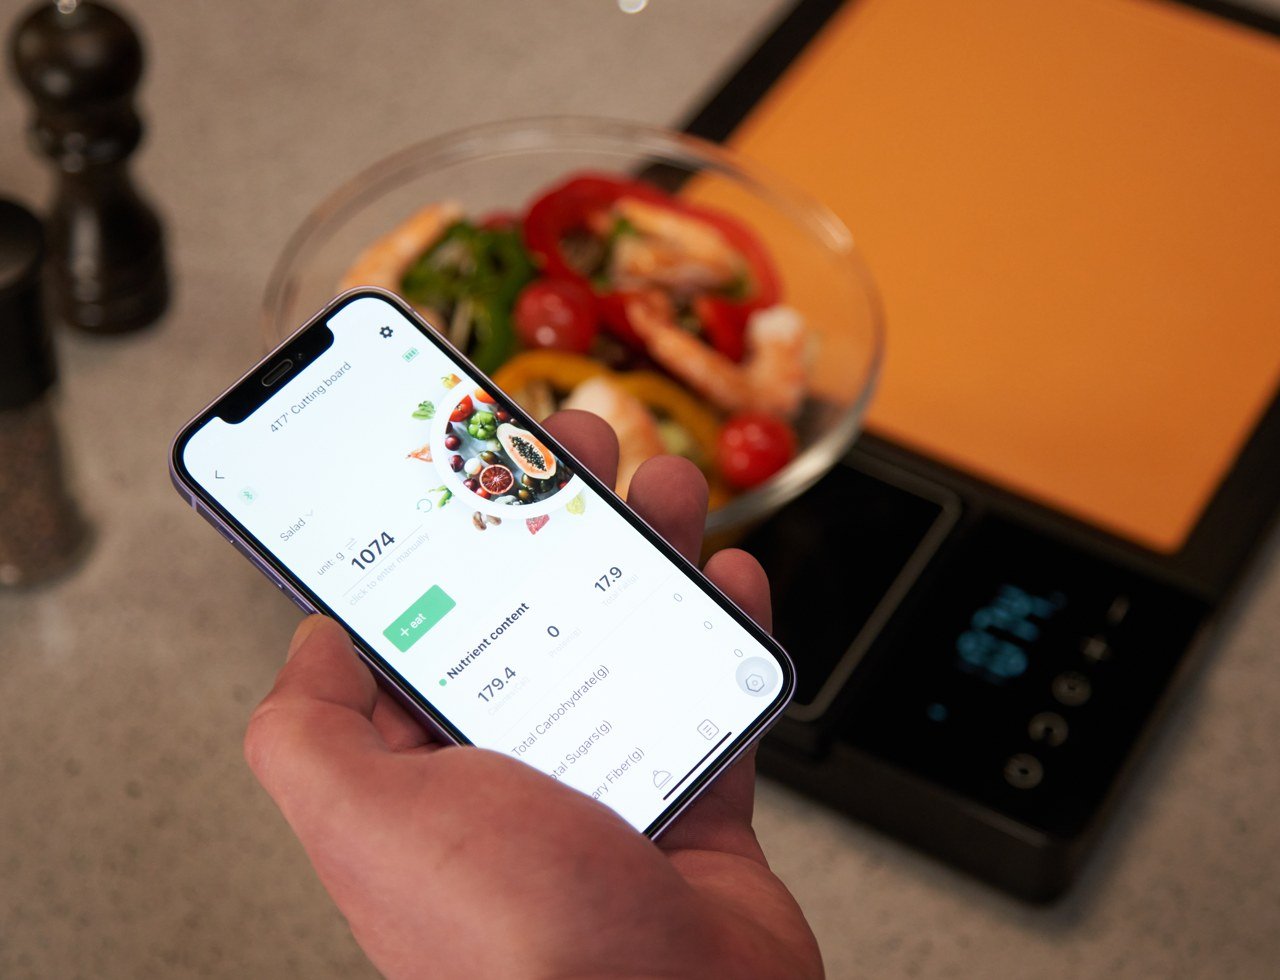 https://www.yankodesign.com/images/design_news/2022/05/smart-chopping-board-with-a-built-in-calorie-counter-and-kitchen-timer-makes-healthy-meal-prep-easy/7-in-1_smart_chopping_board_04.jpg